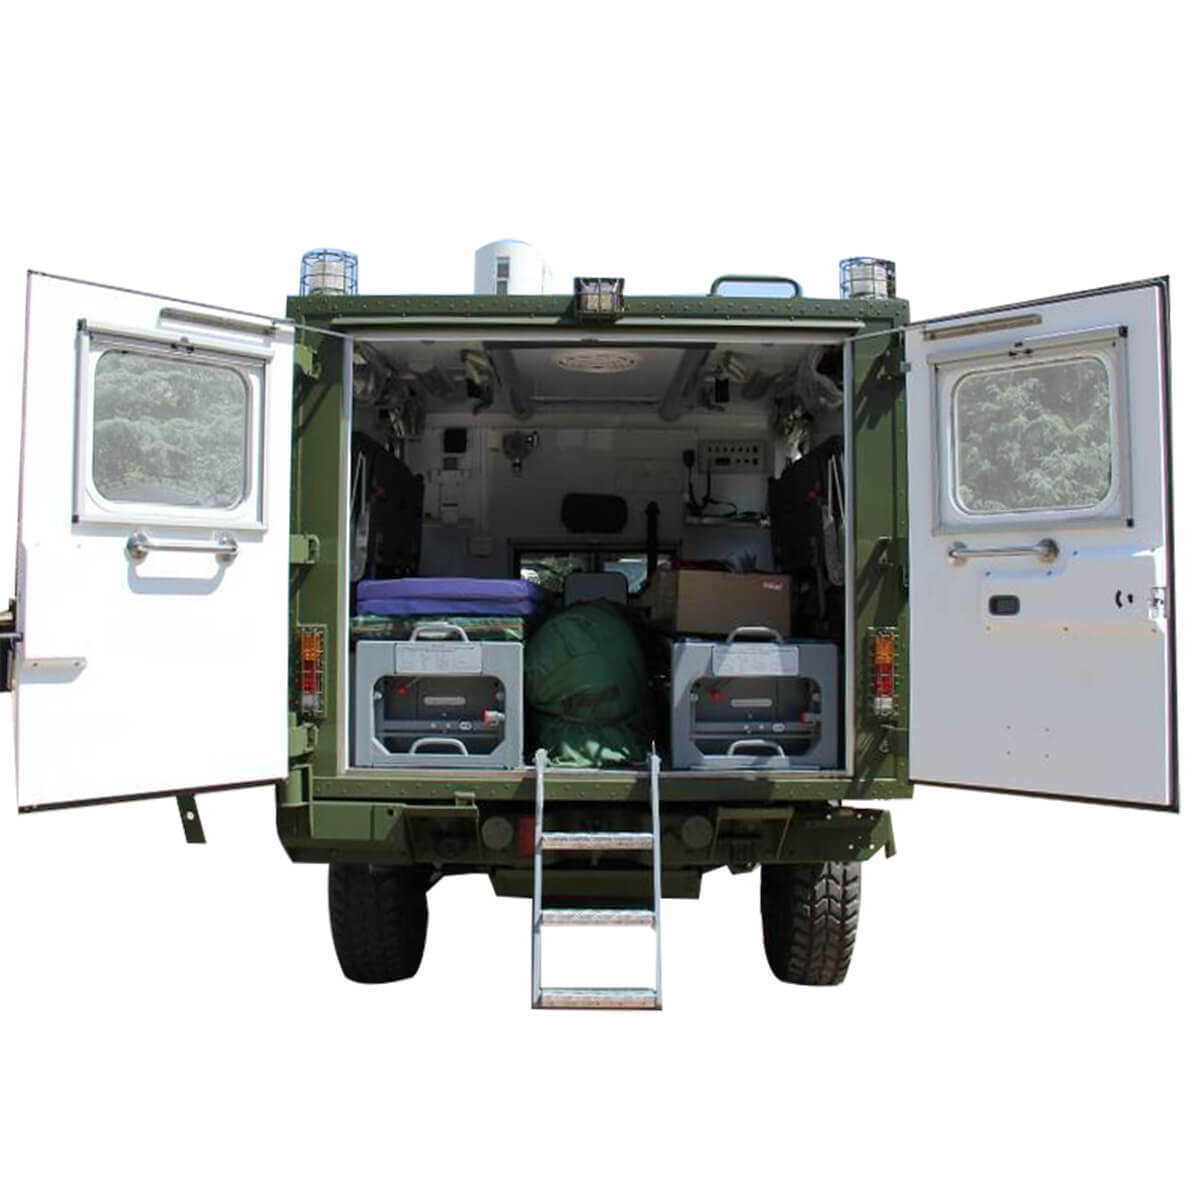  Dongfeng Brave warrior Offroad Field-operations Emergency Support Ambulance